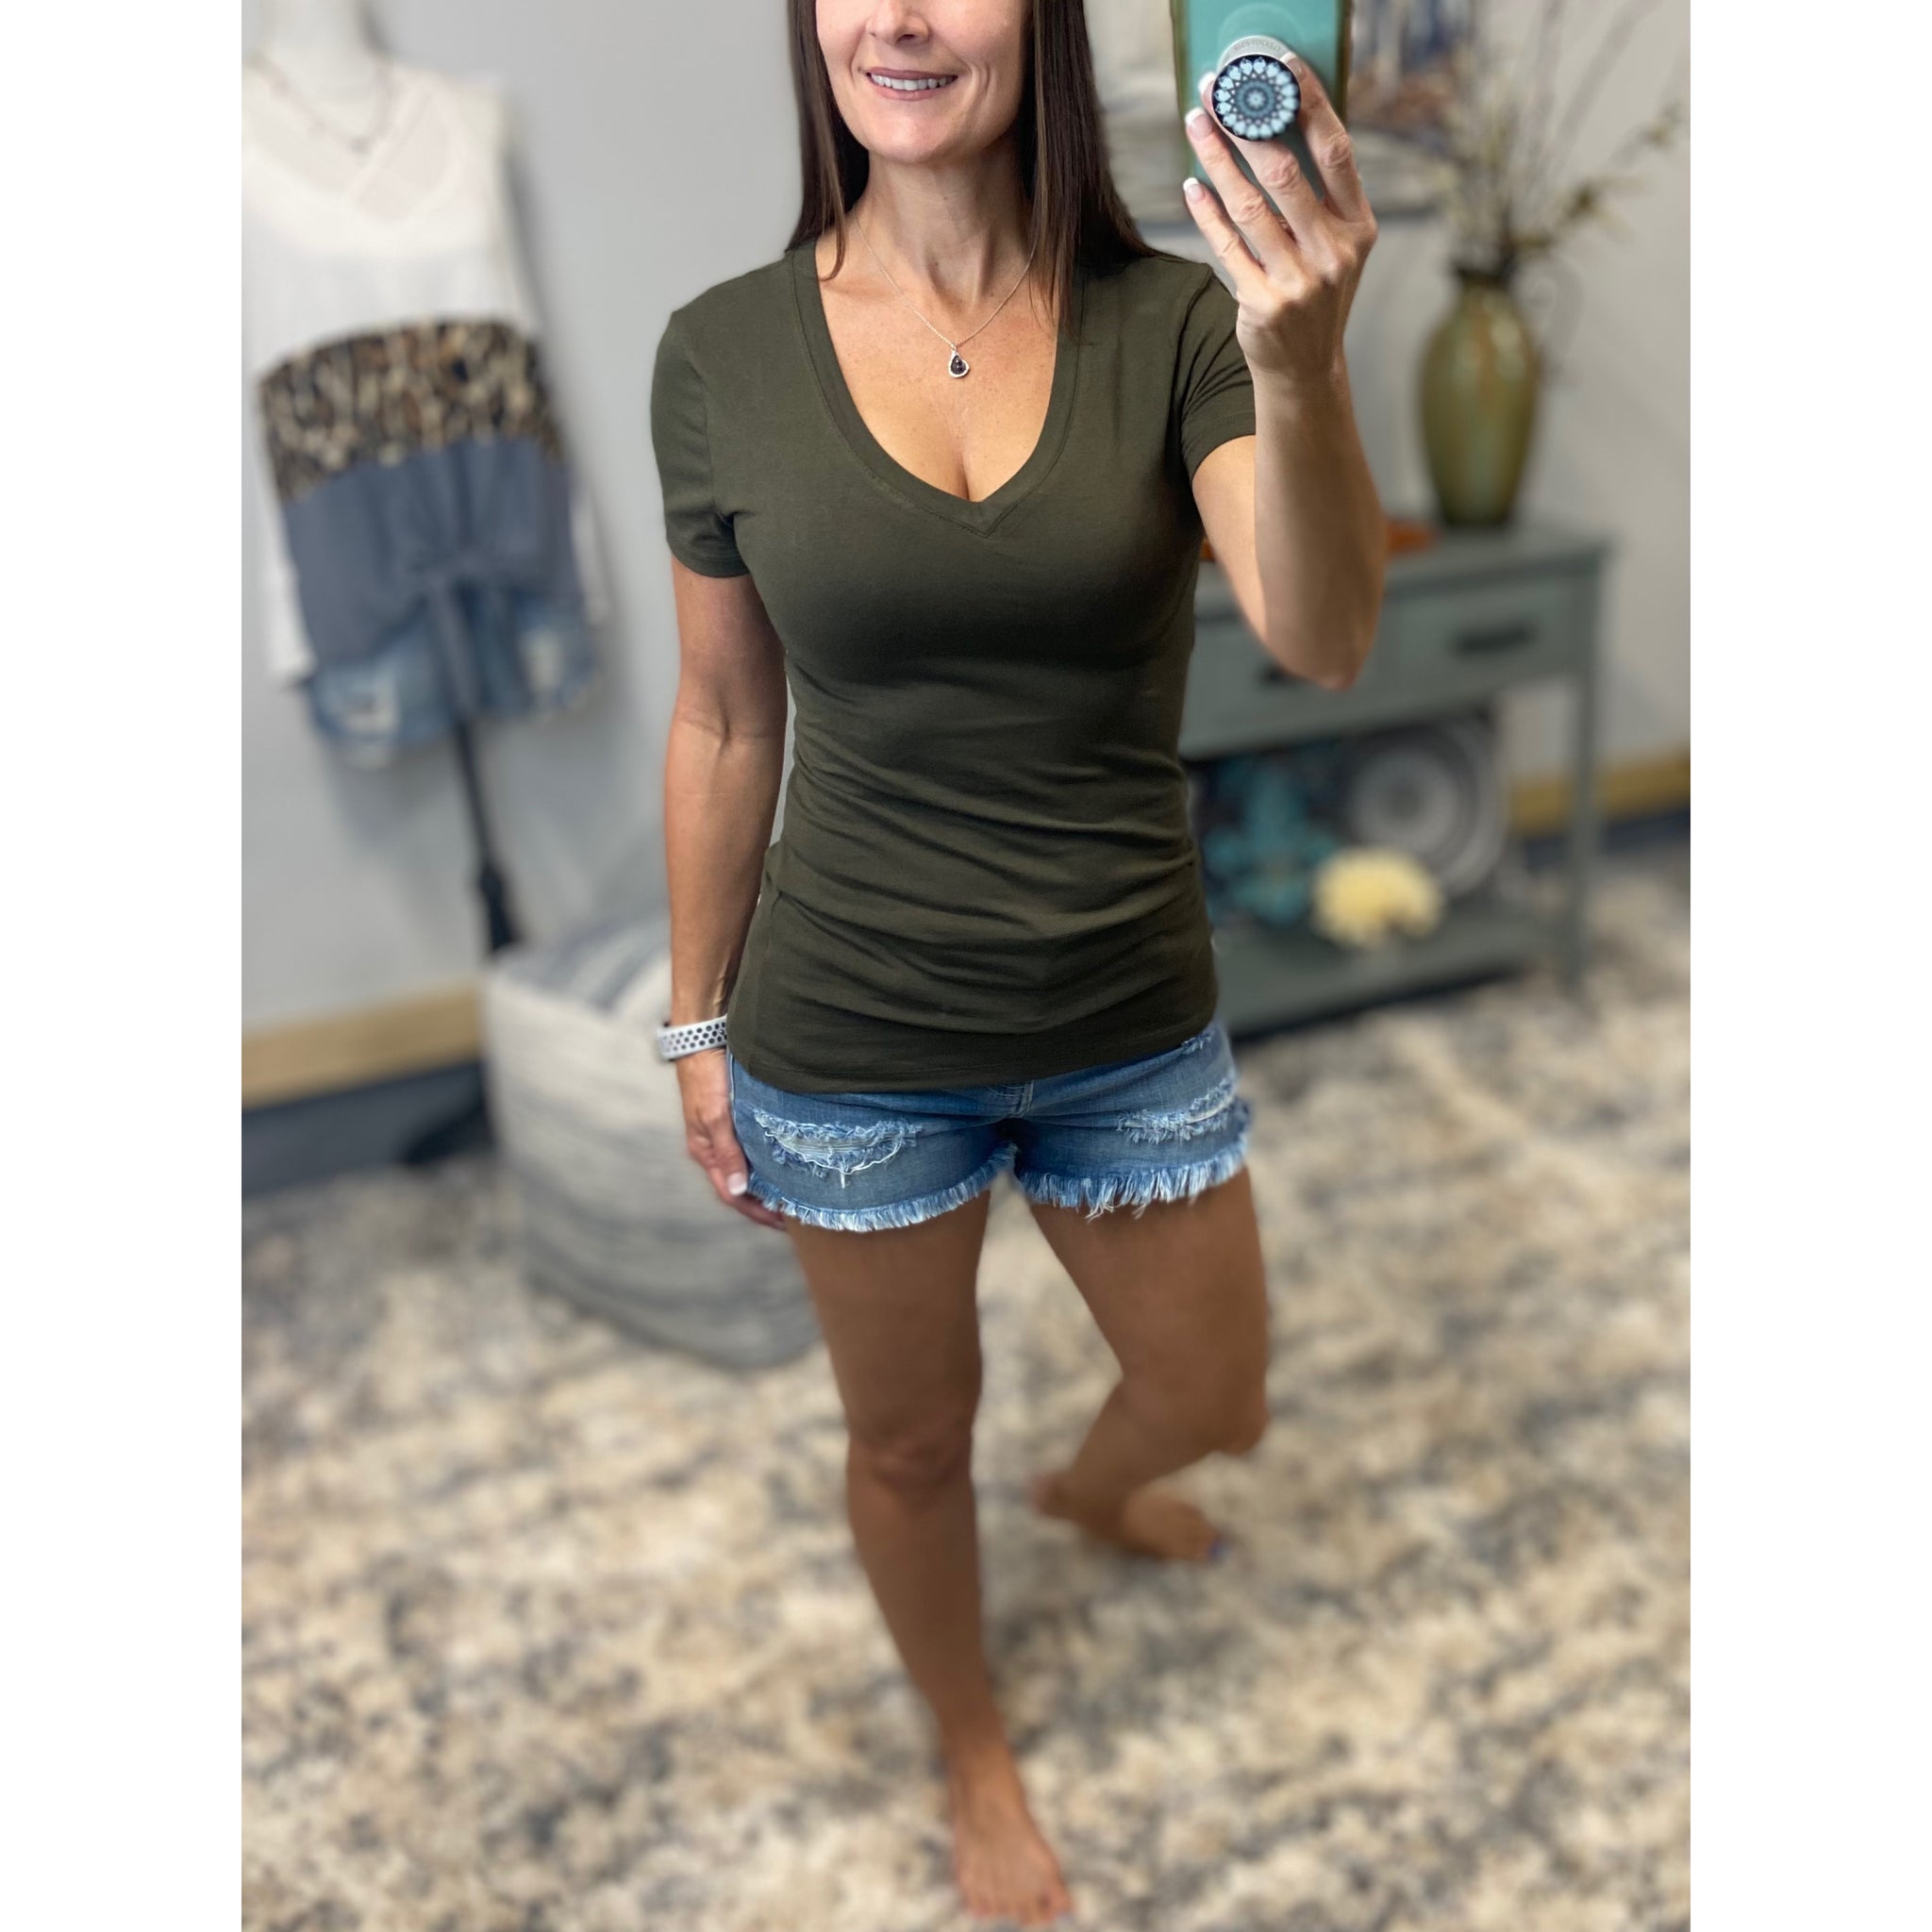 “Basic Babe” Low Cut V-Neck Cleavage Baby Slimming Basic Tee Shirt Dk Olive S/M/L/XL